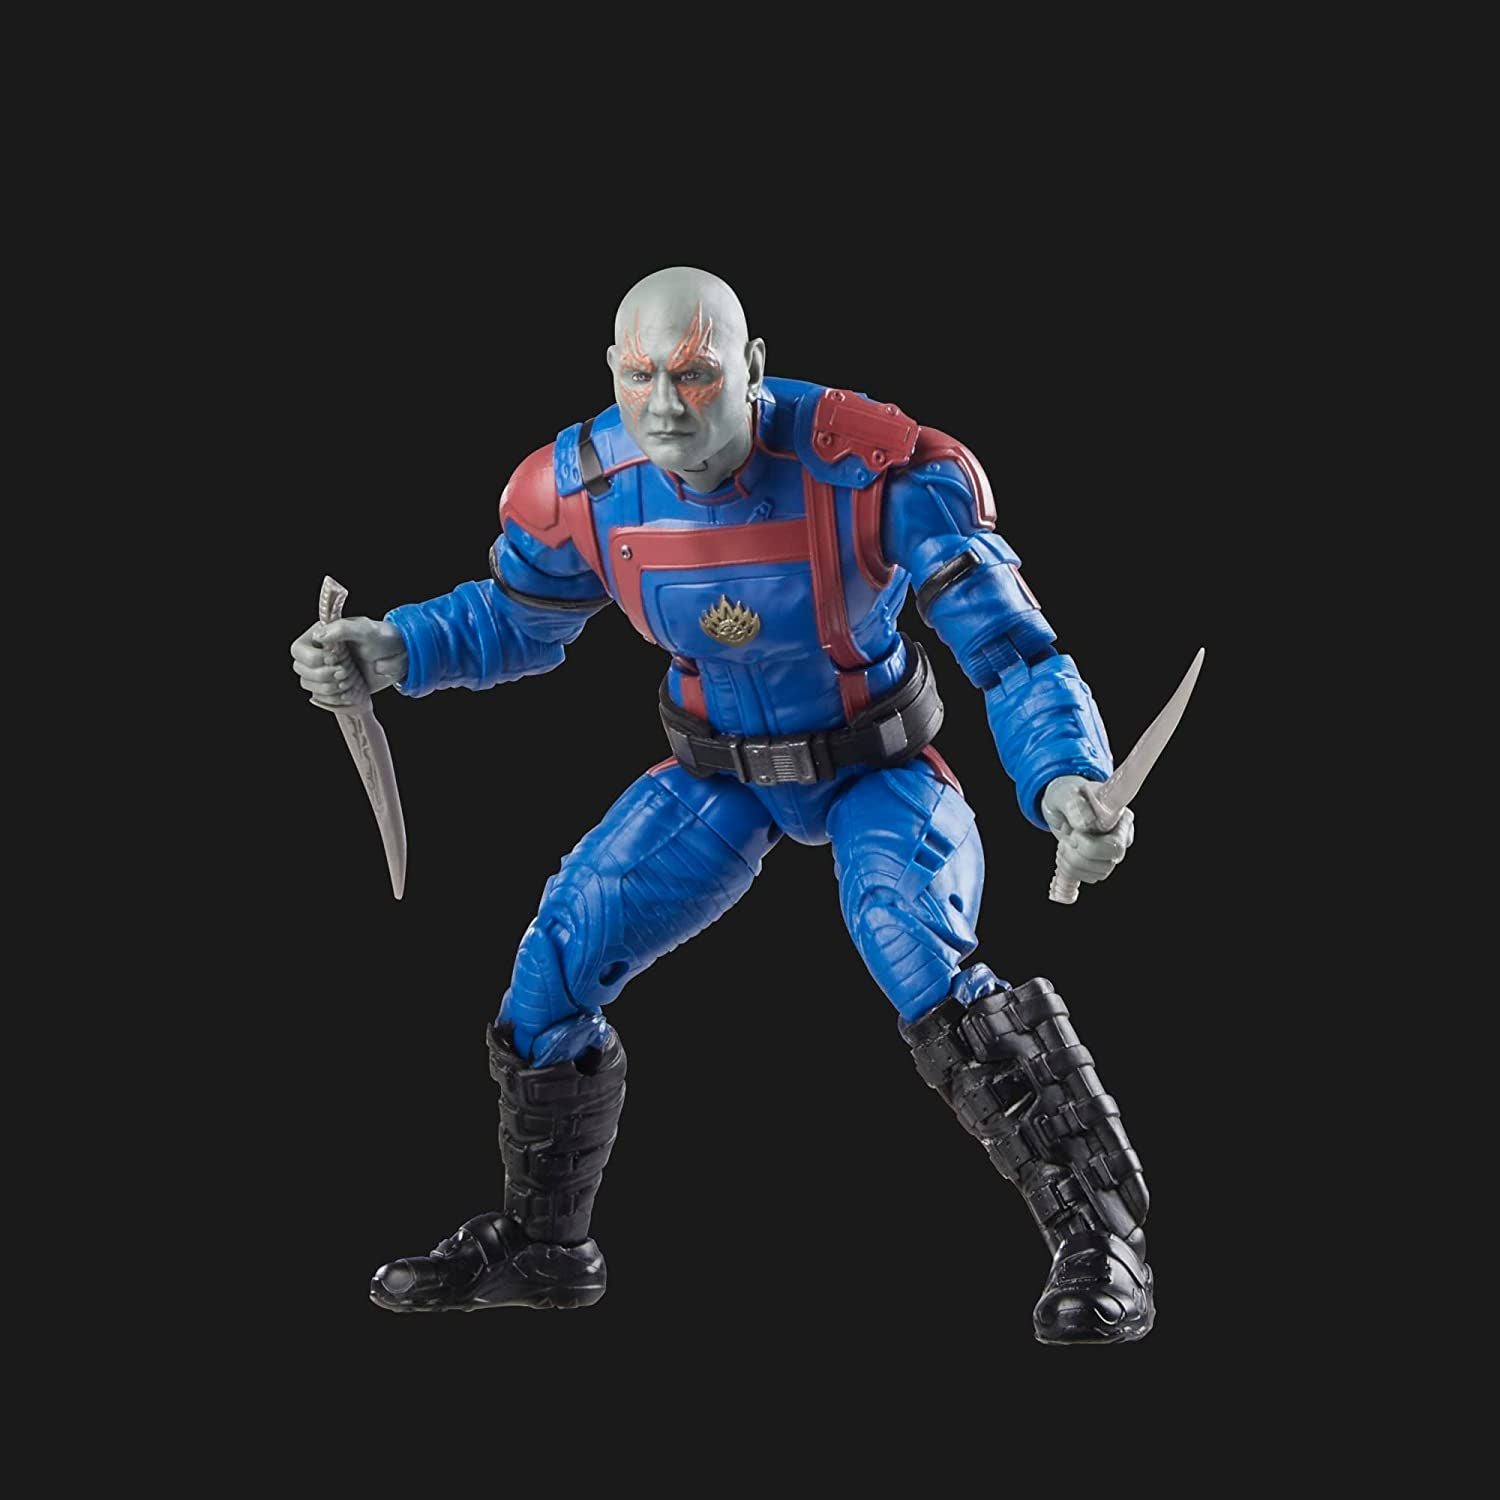 Guardians of the Galaxy Vol. 3 Marvel Legends Drax 6-Inch Action Figure Toy - HERETOSERVEYOU